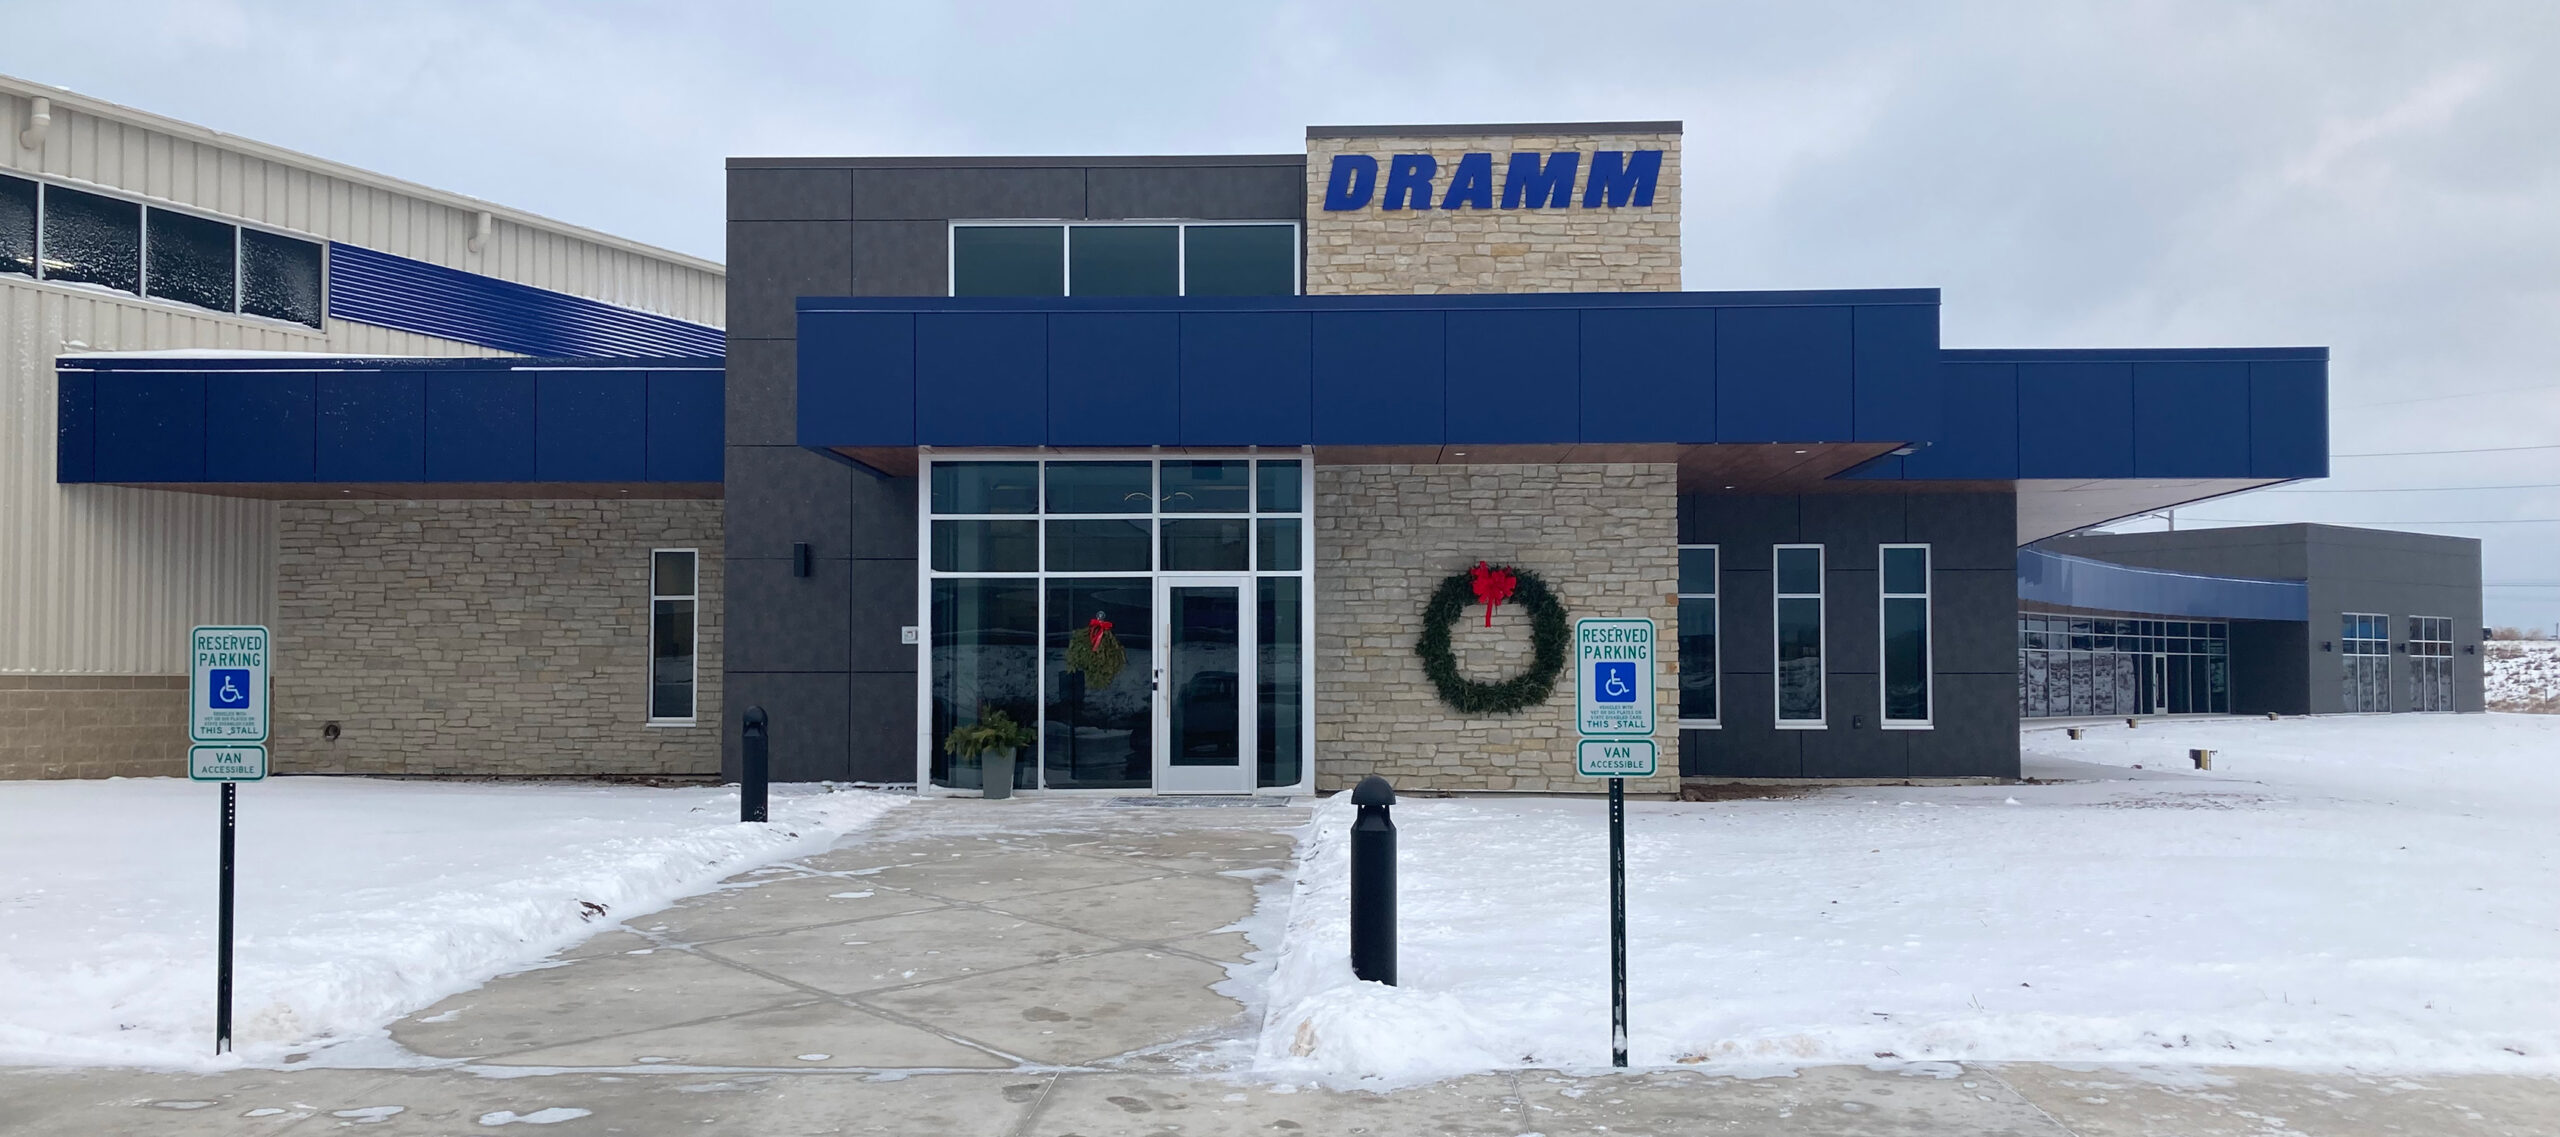 Dramm Corporation unveiled its new headquarters in Manitowoc recently.